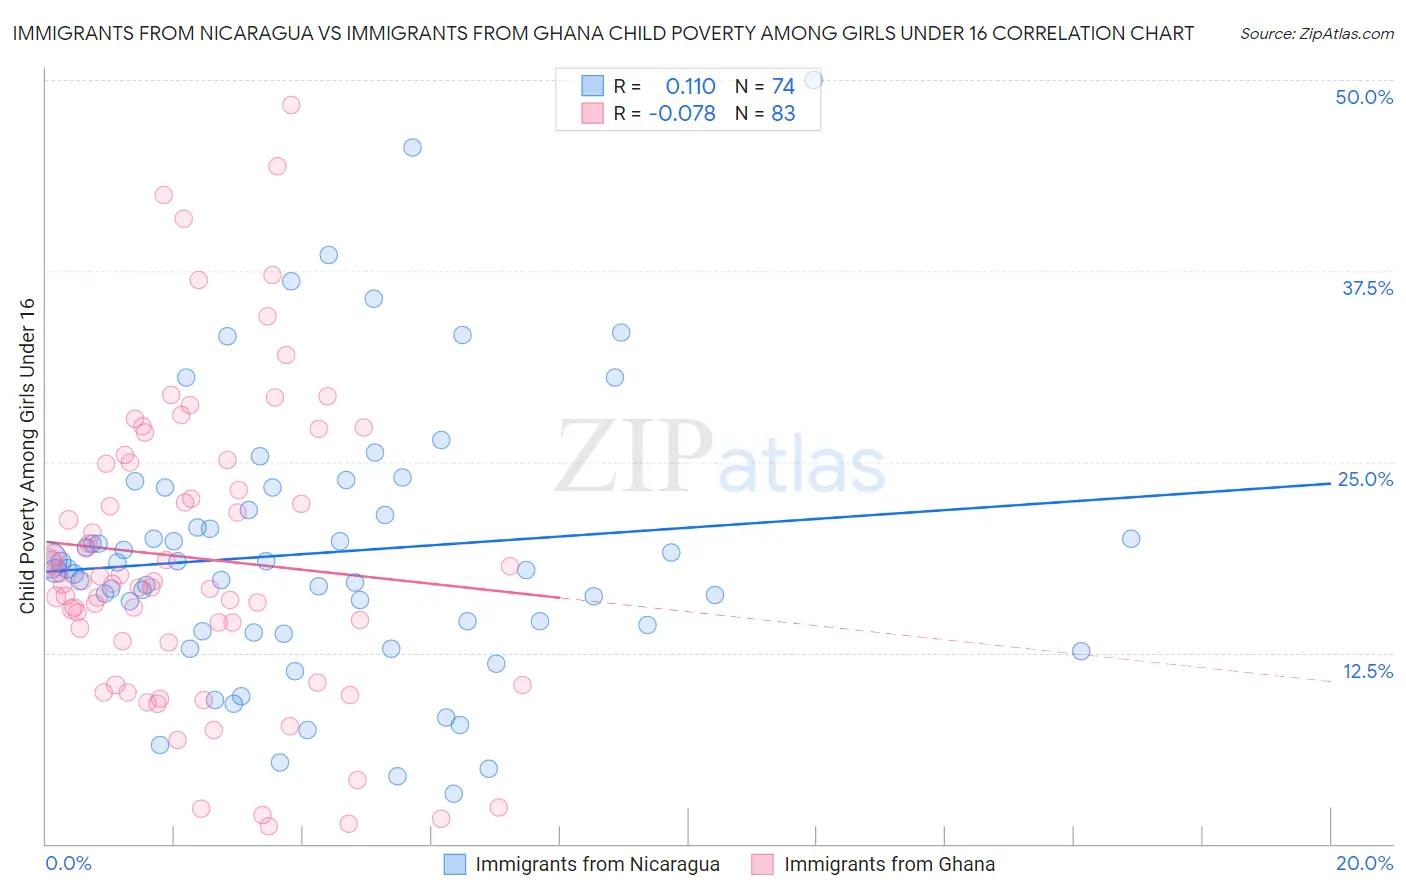 Immigrants from Nicaragua vs Immigrants from Ghana Child Poverty Among Girls Under 16